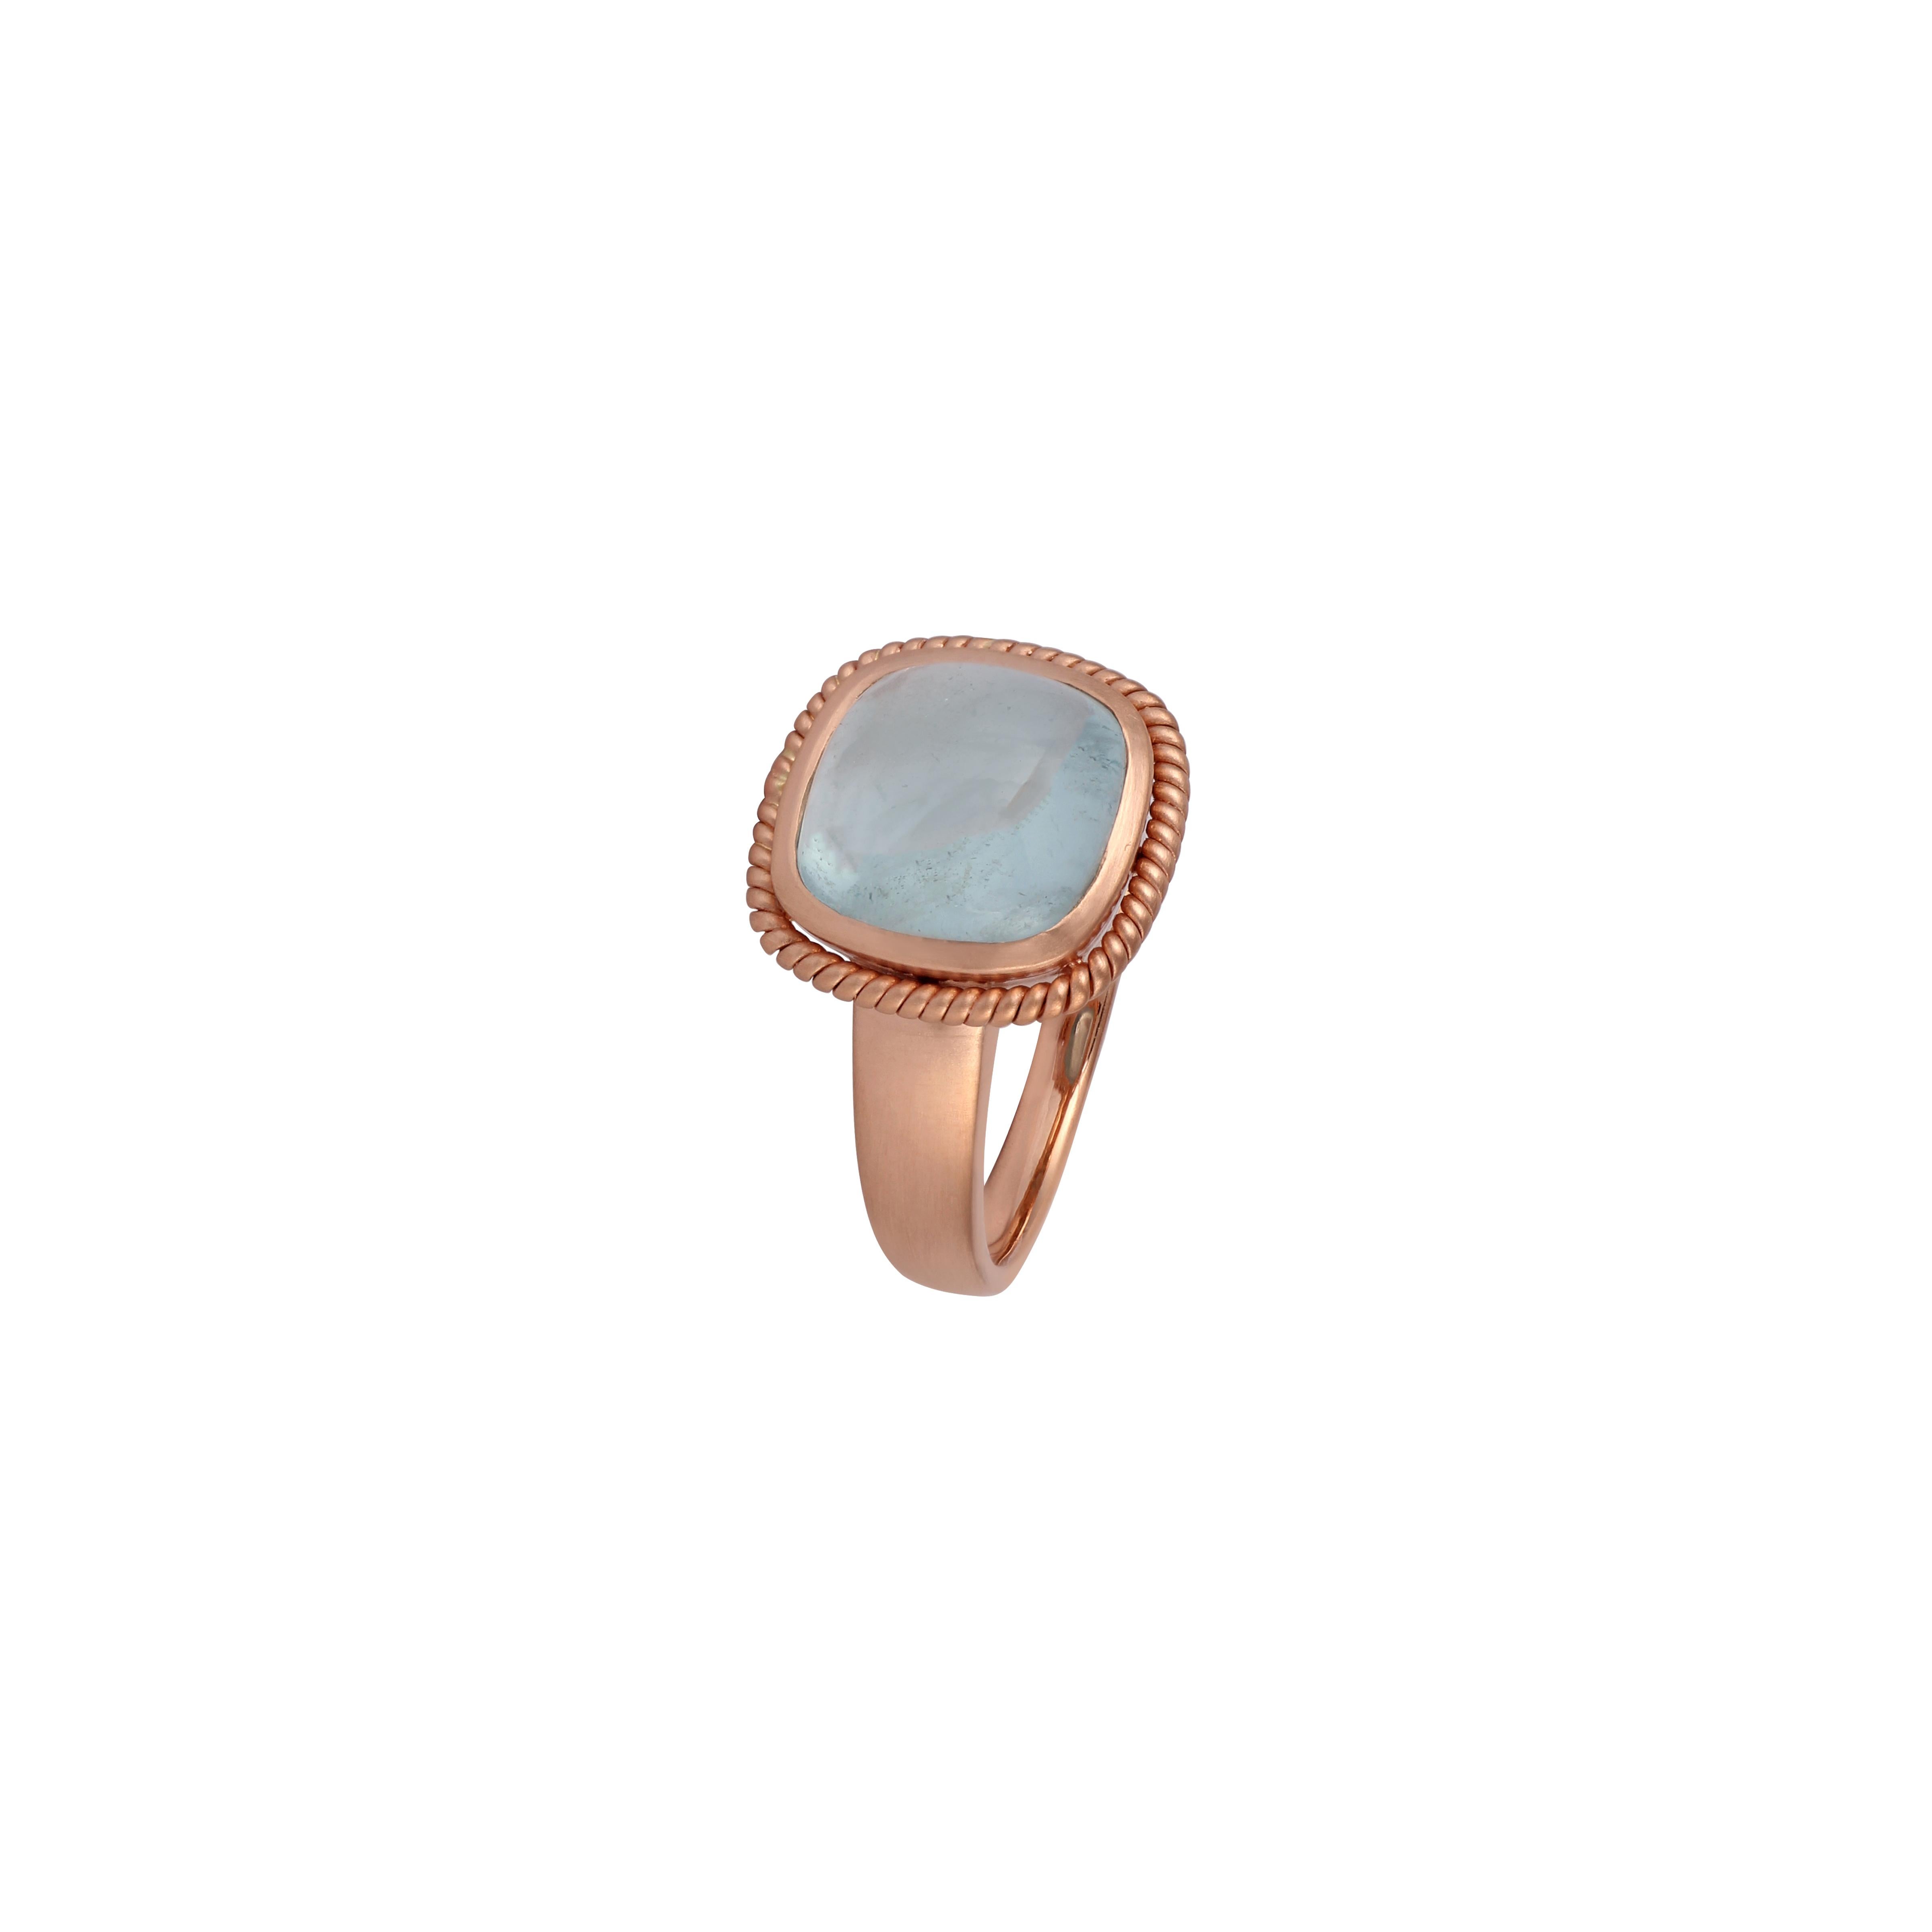 Cabochon 4.40 Carat Aquamarine Ring Studded in 18k Rose Gold For Sale